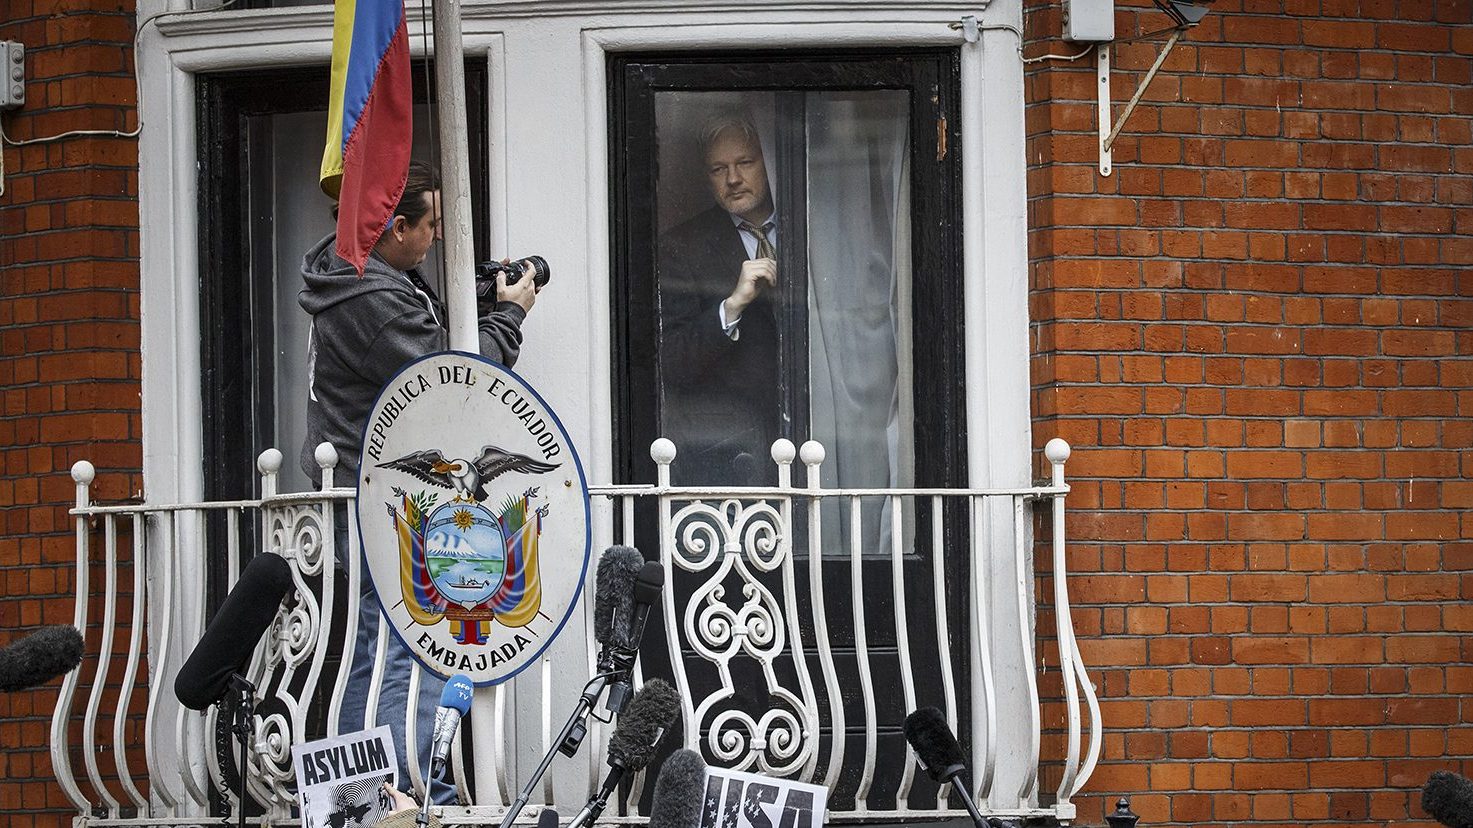 Wikileaks founder Julian Assange prepares to speak from the balcony of the Ecuadorian embassy where he continues to seek asylum following an extradition request from Sweden in 2012, on February 5, 2016 in London, England. The United Nations Working Group on Arbitrary Detention has insisted that Mr Assange's detention should be brought to an end. (Tolga Akmen/Anadolu Agency/Getty Images)